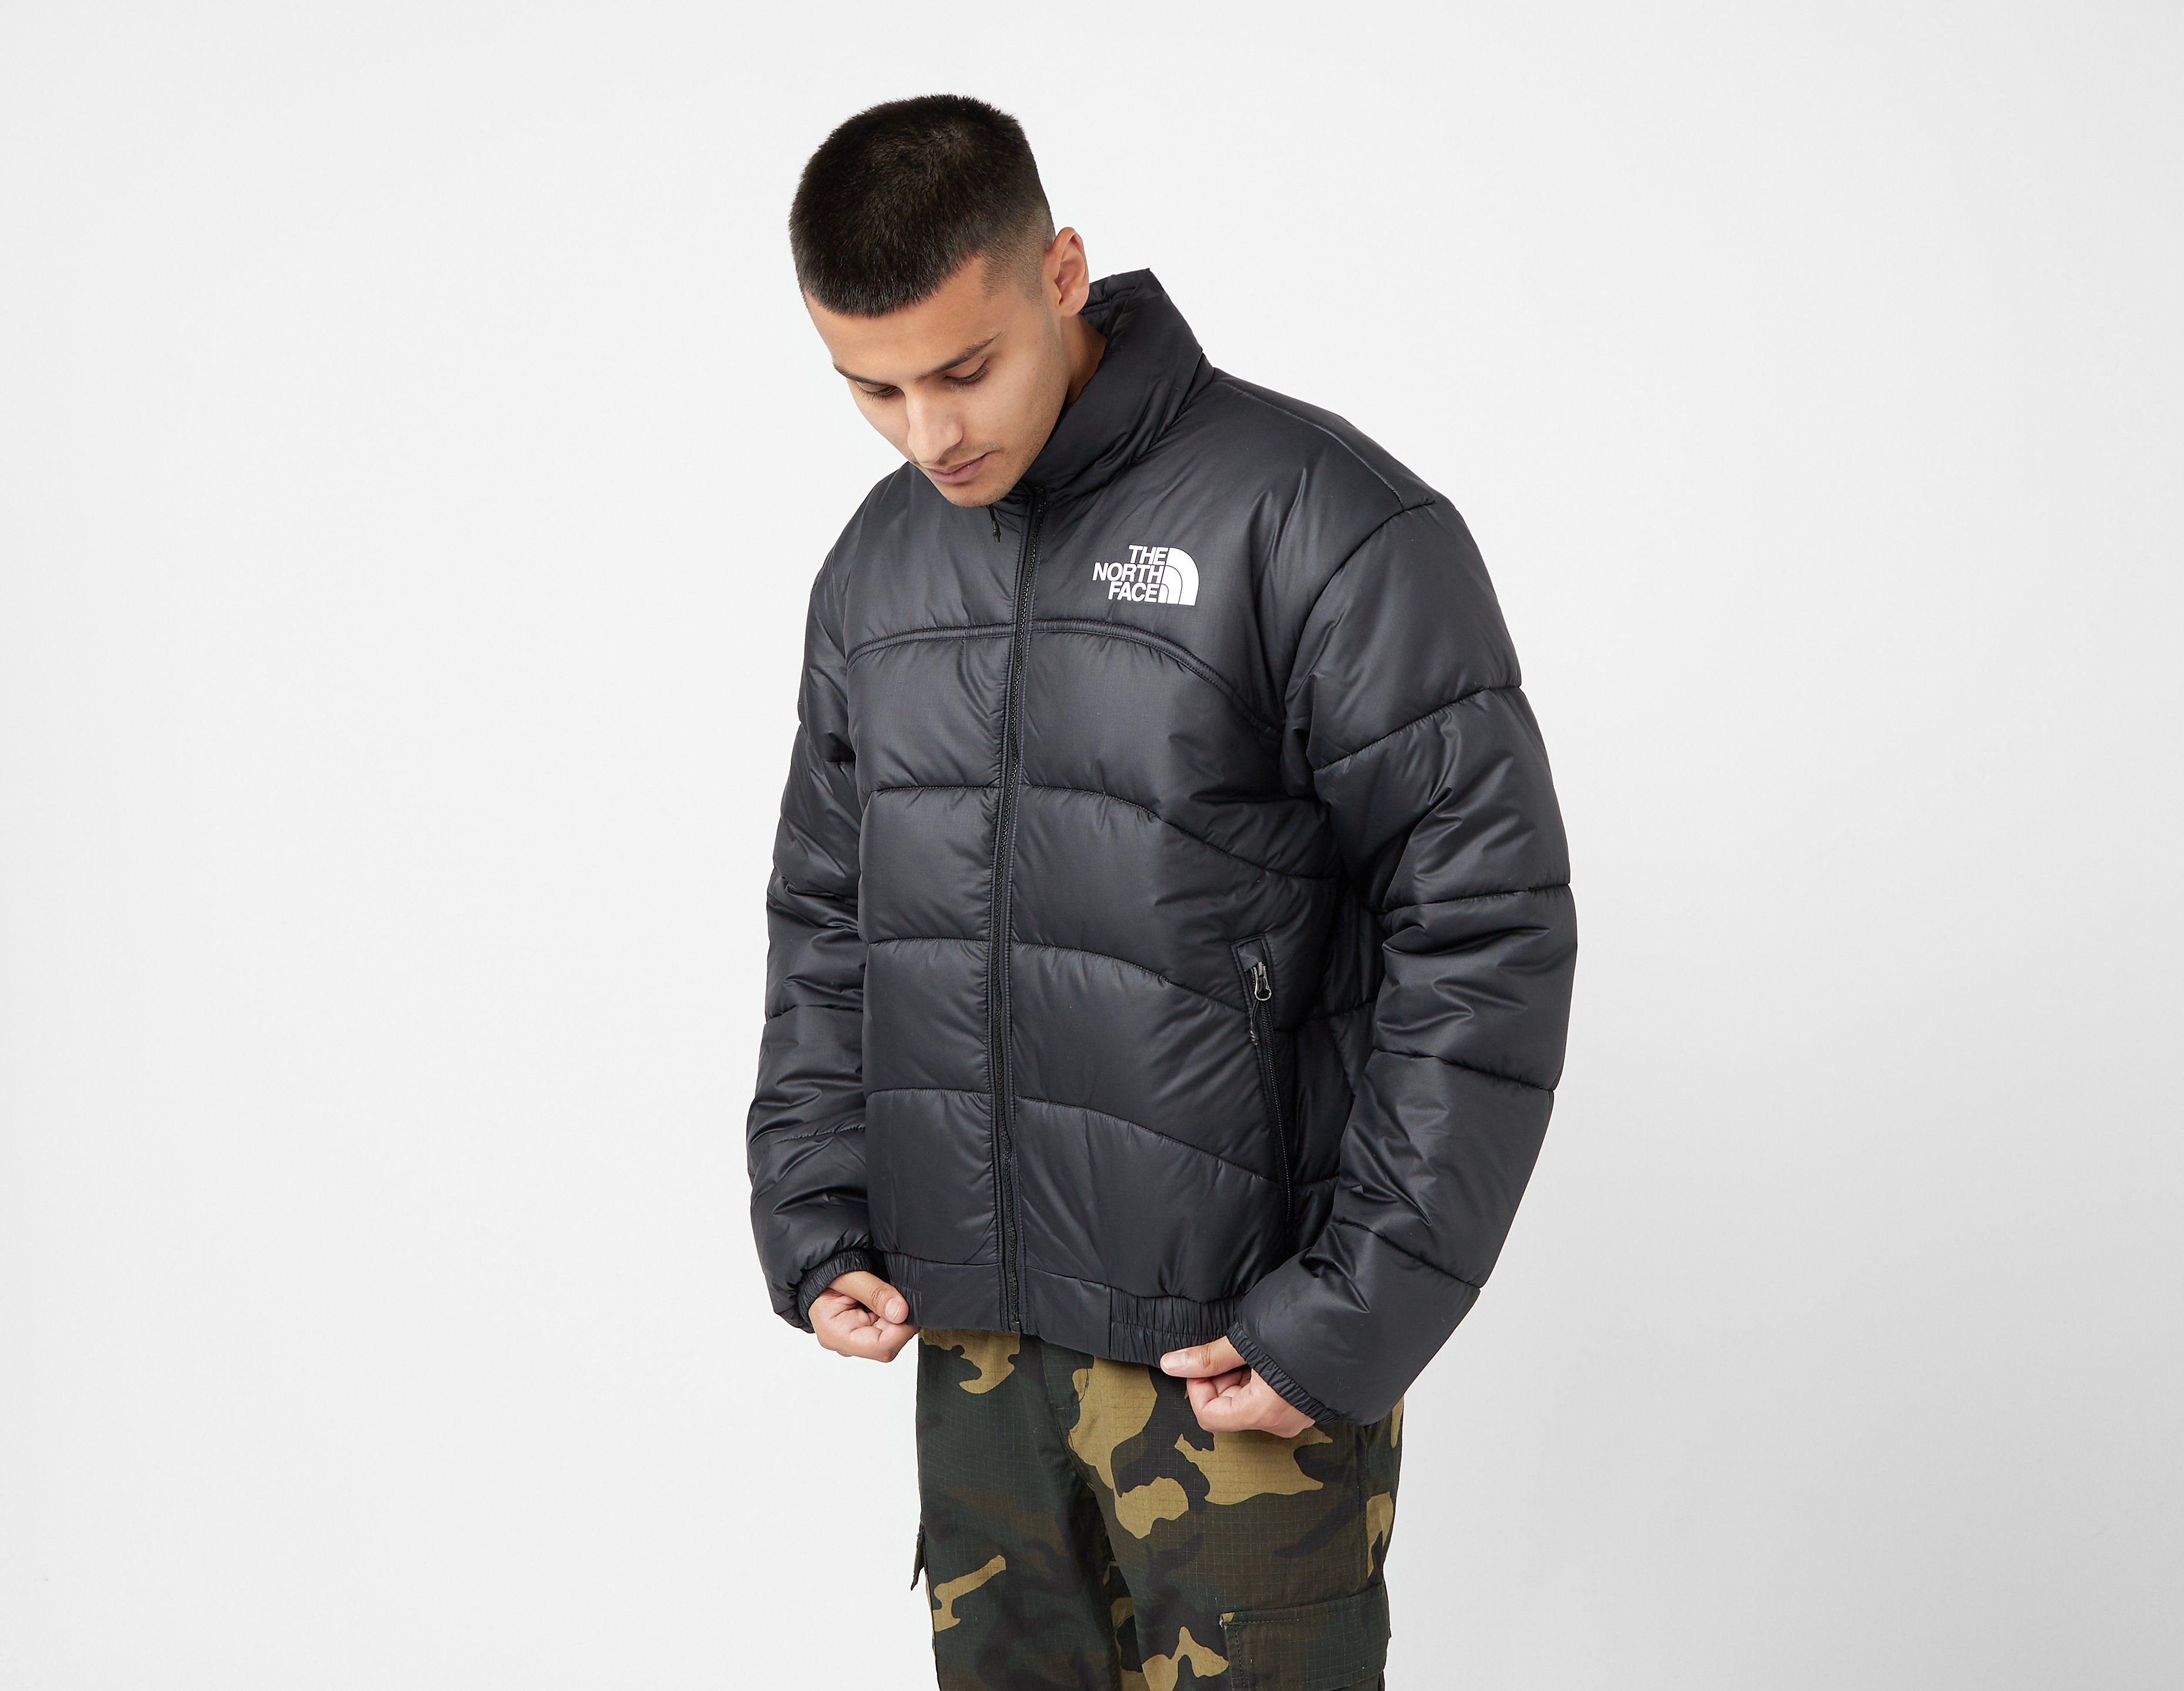 The North Face 2000 Printed Elements Jacket, Black